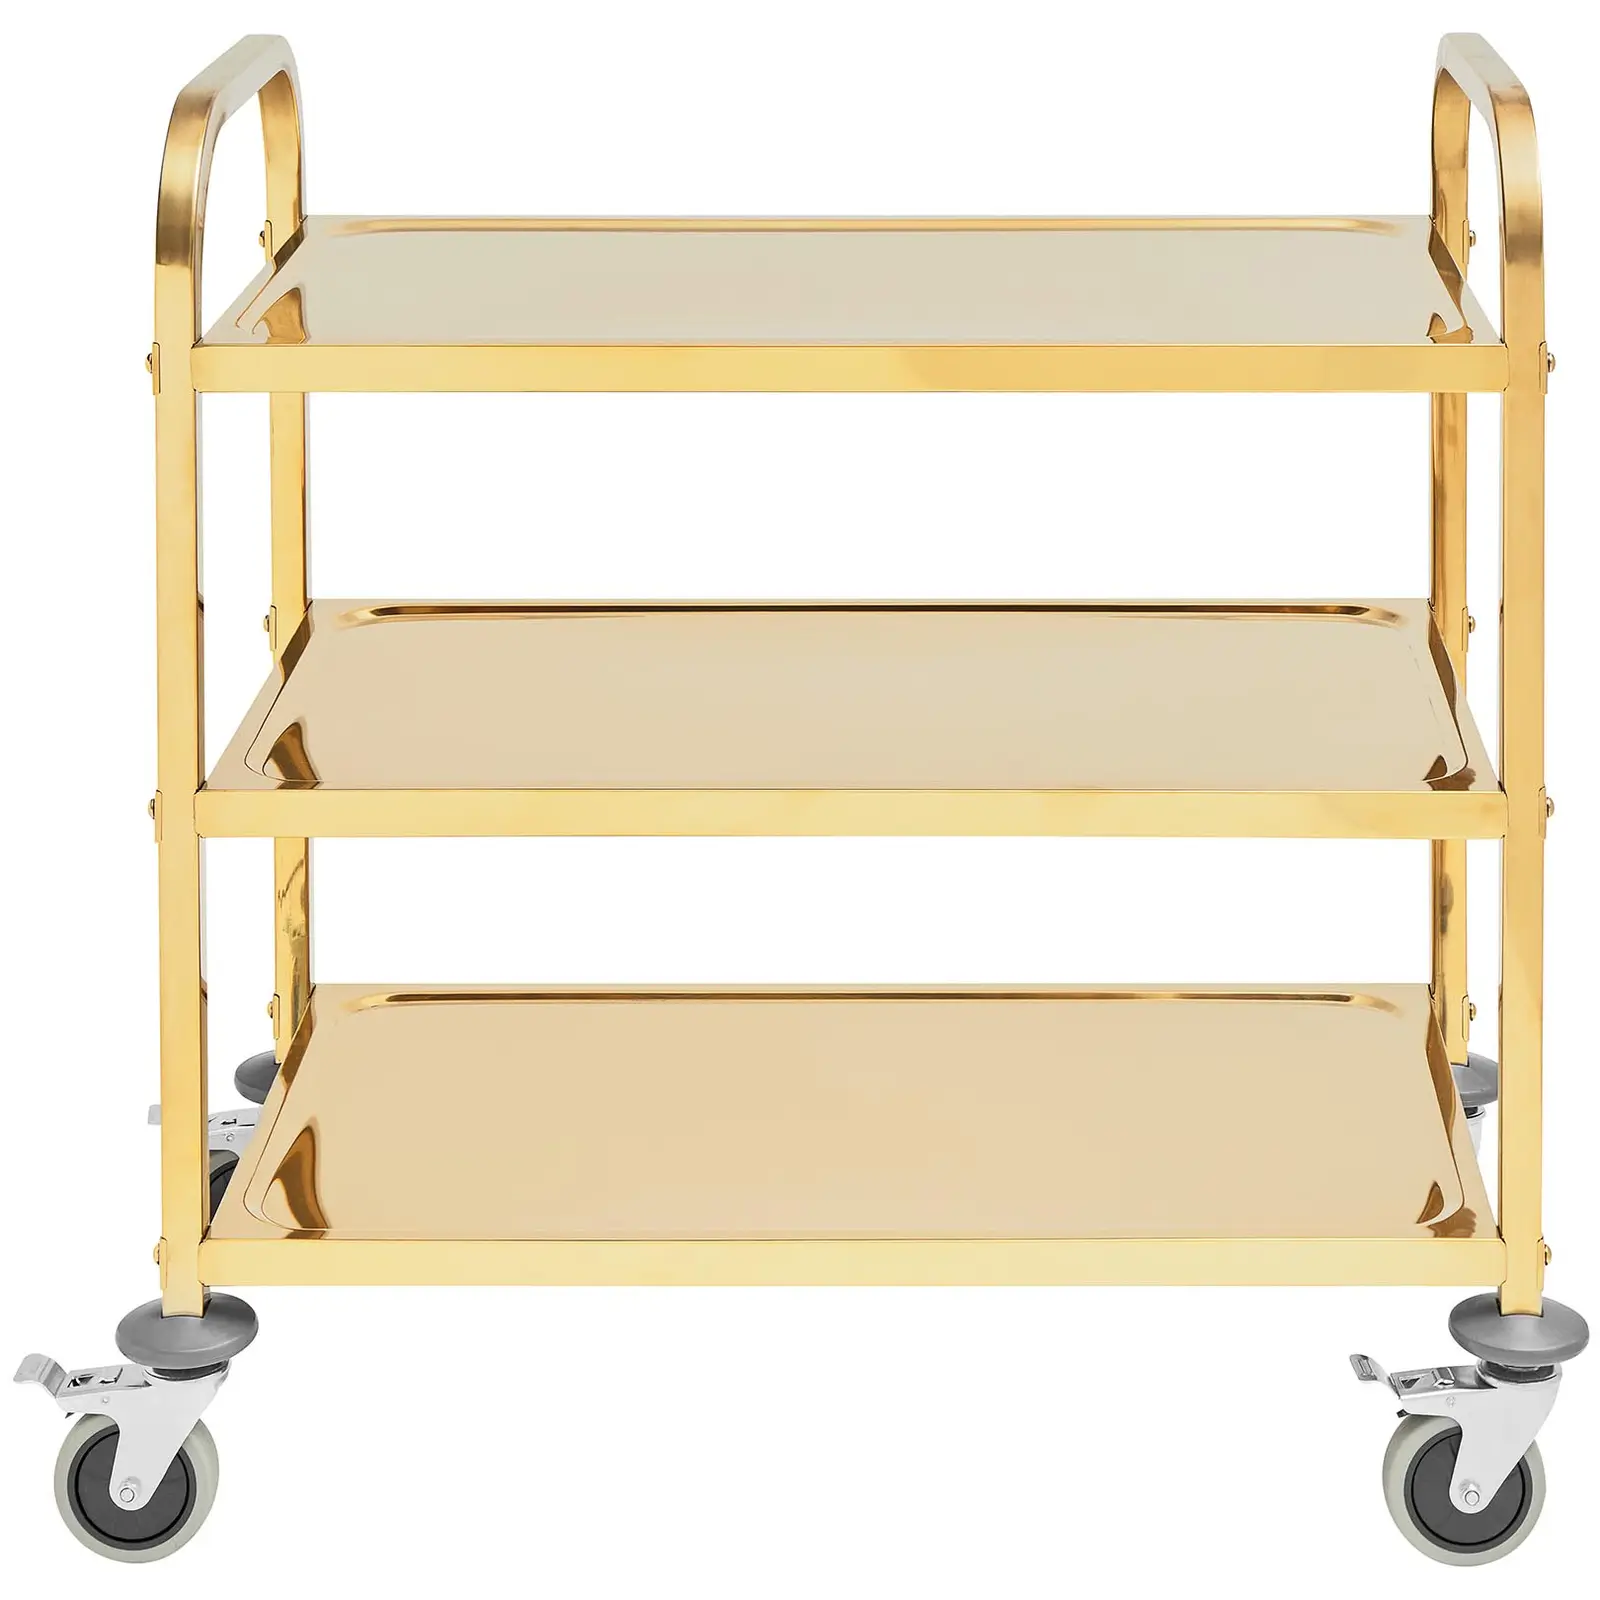 Service Trolley - 3 shelves - Royal Catering - up to 240 kg - shelves: 79.5 x 44.5 cm